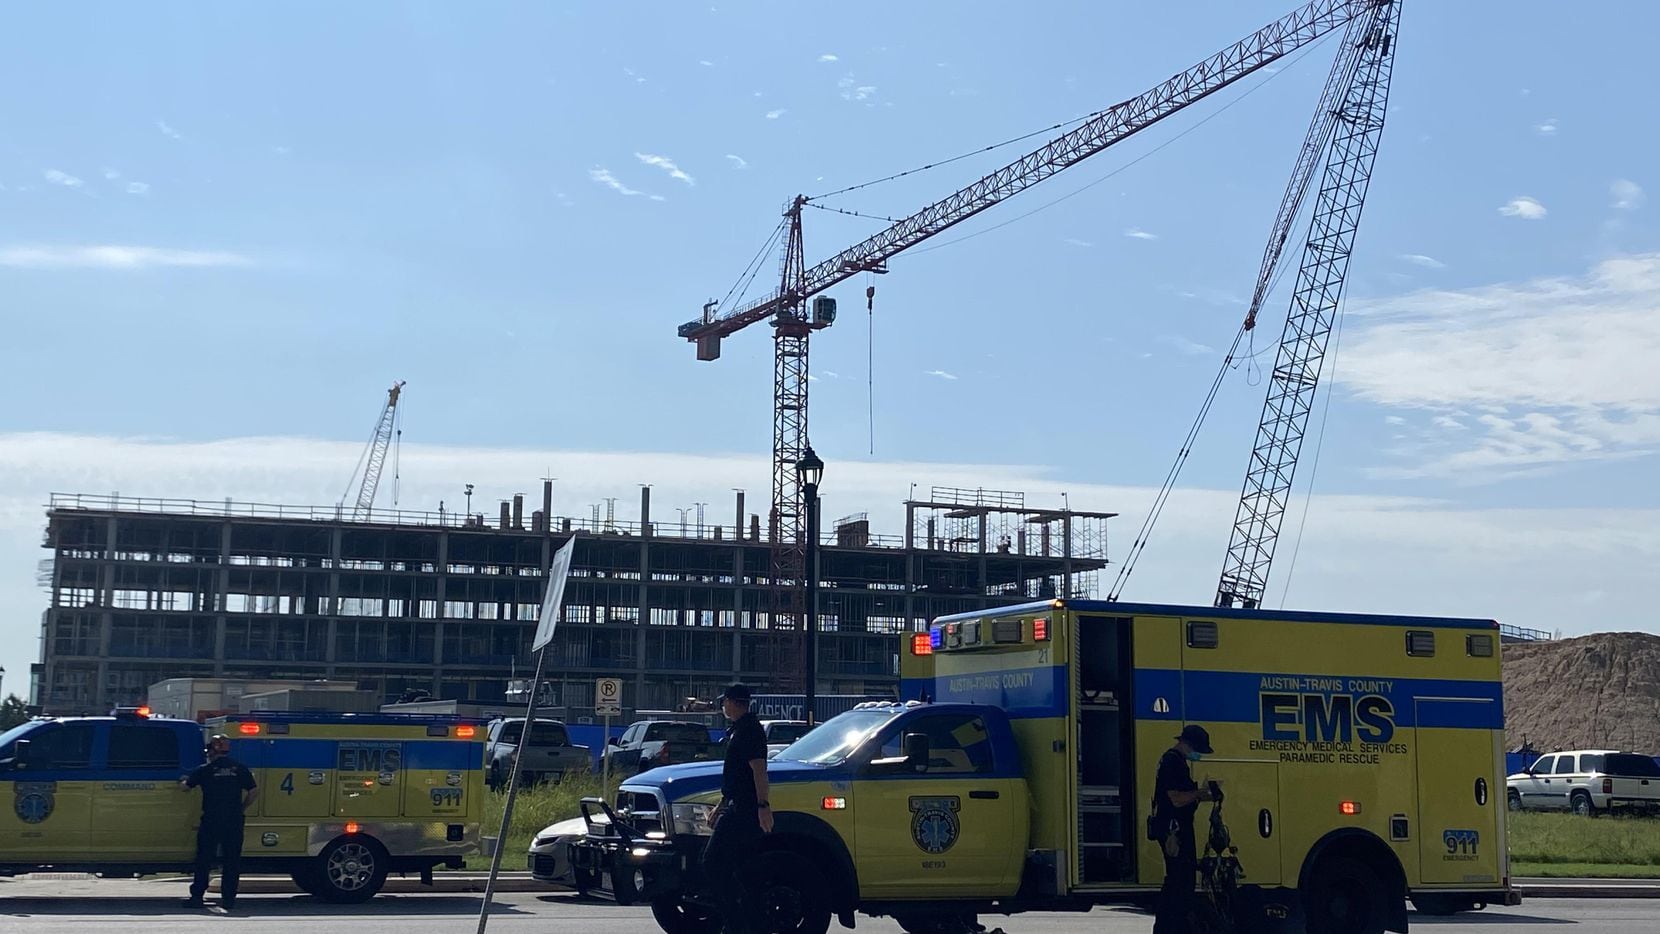 Two construction cranes collided Wednesday at a work site in Austin, injuring at least 22...